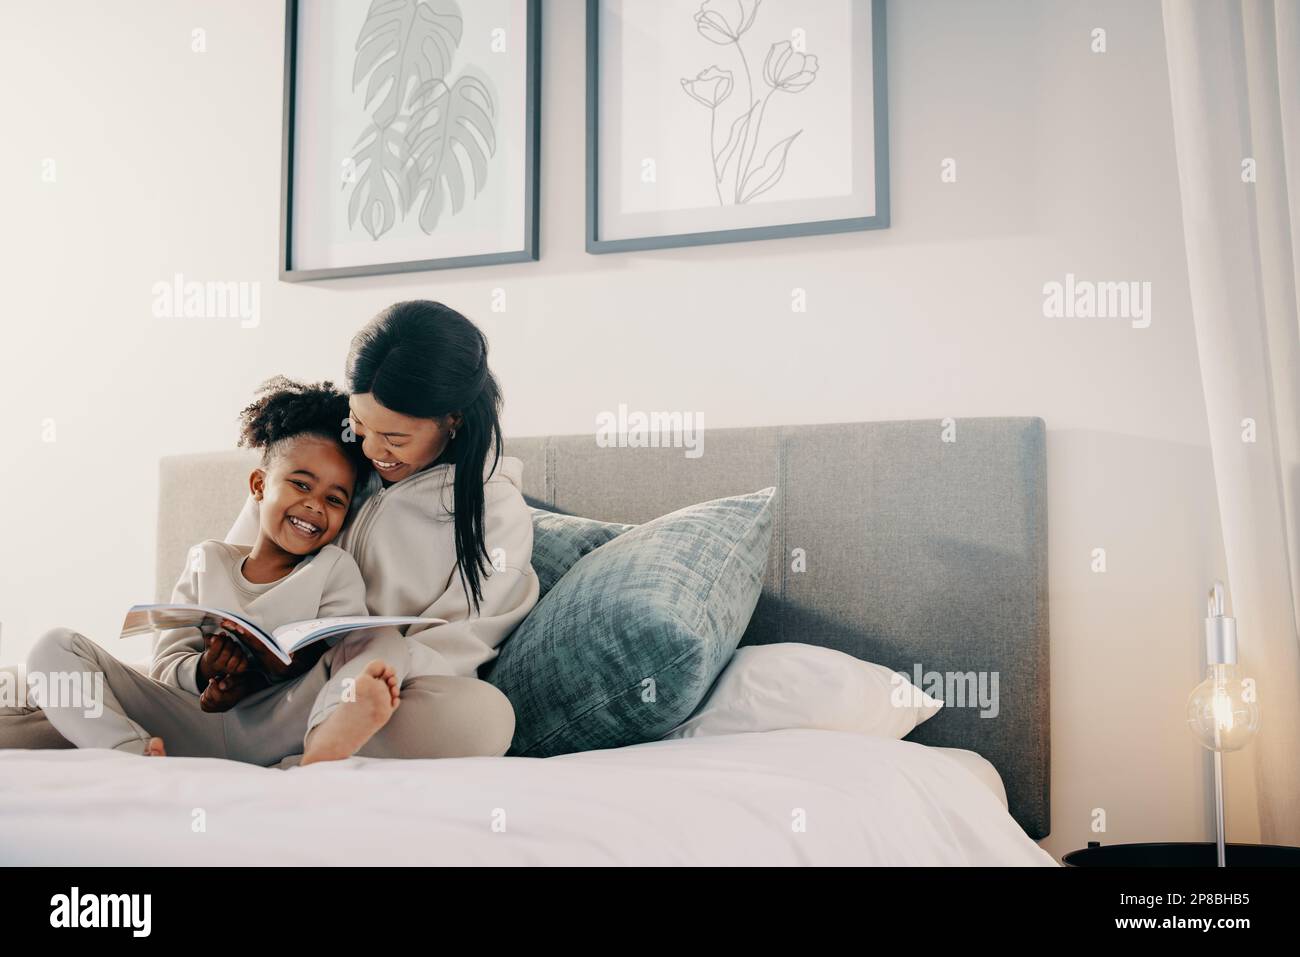 Mother and daughter spend time reading a book together, they’re smiling and sitting on a bed. Happy mom is helping her child with her reading skills. Stock Photo